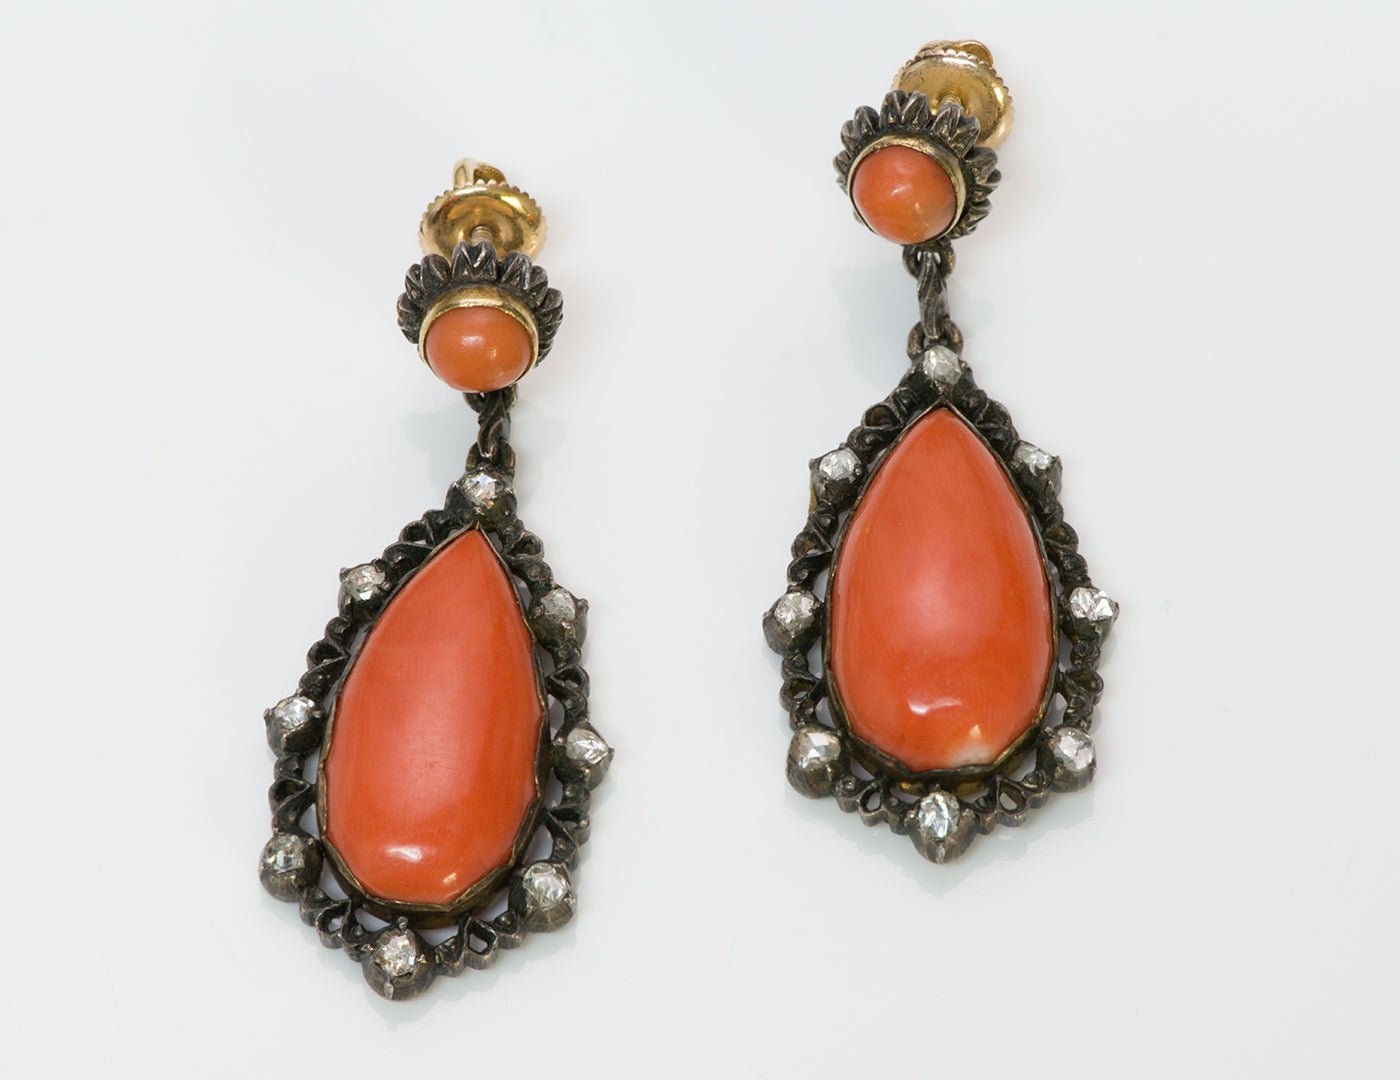 The Essential Guide to Buying Coral Jewelry - DSF Antique Jewelry